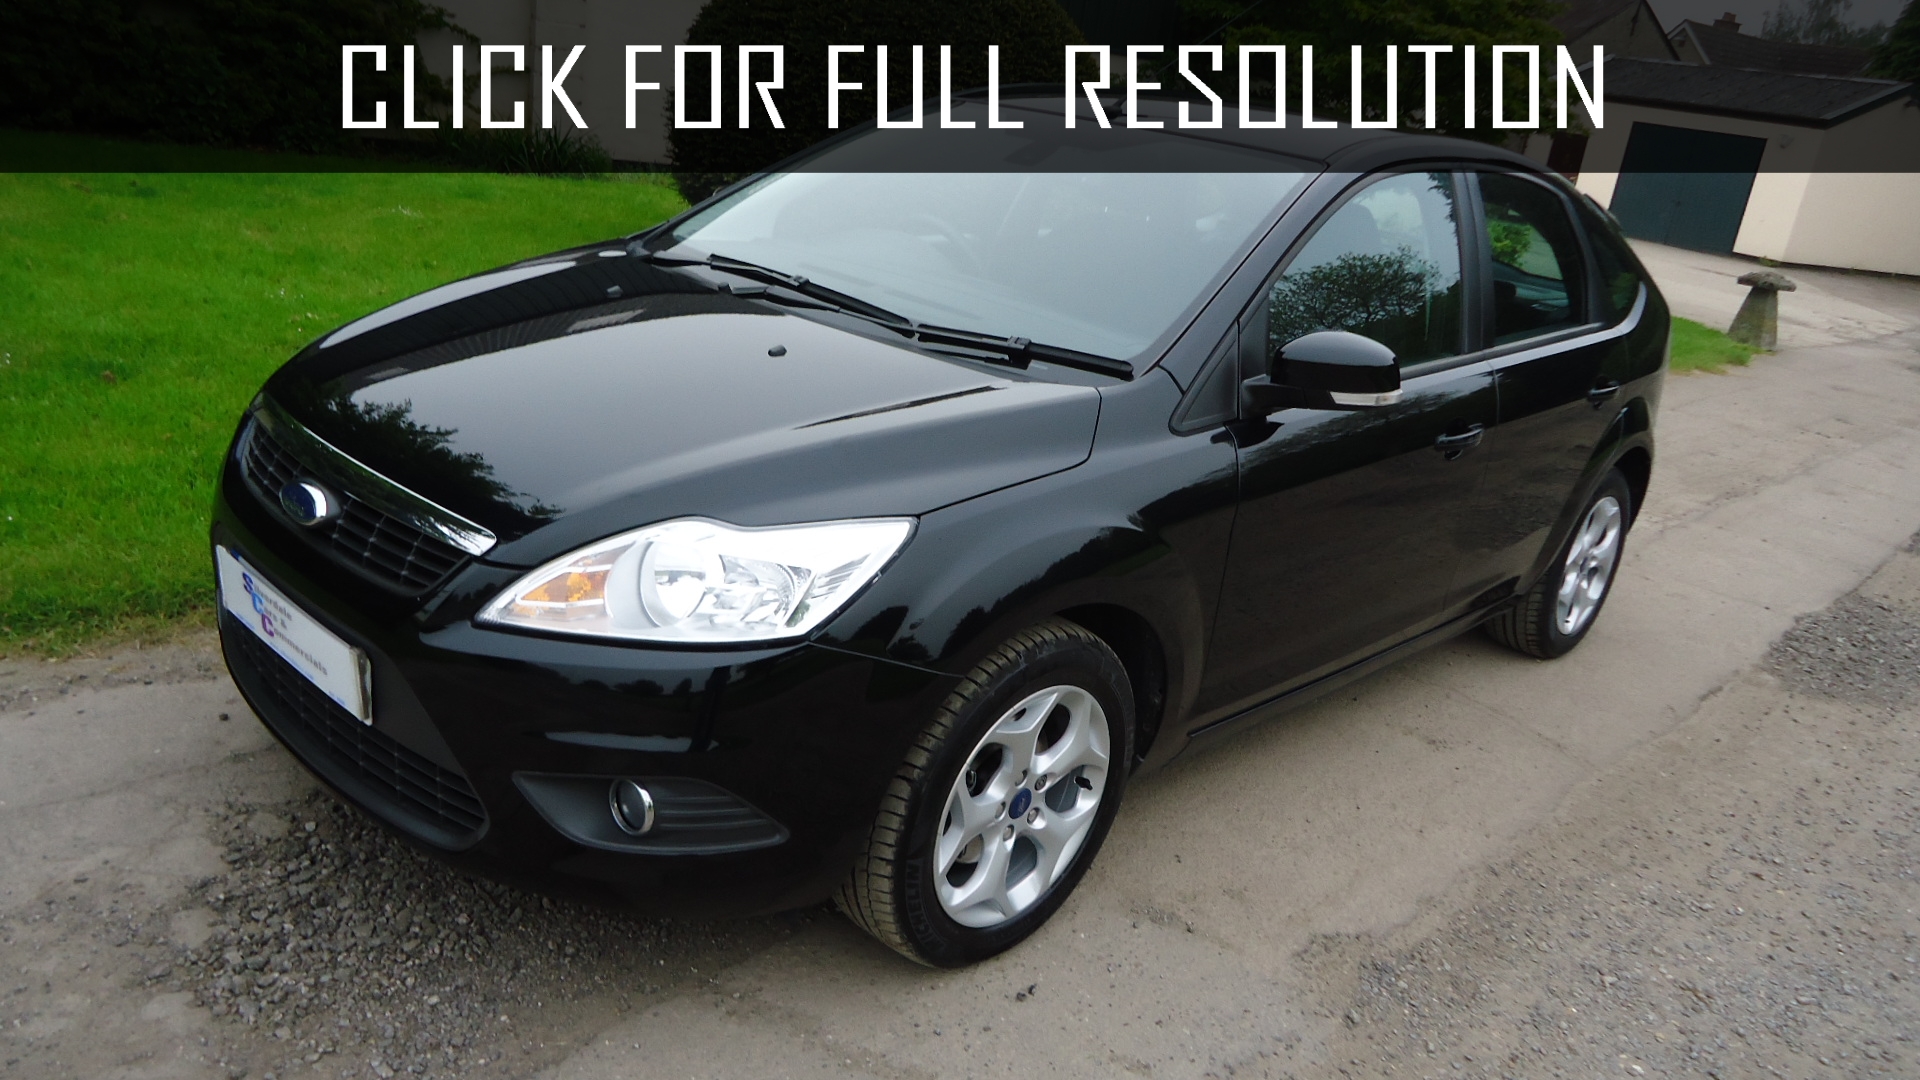 Ford Focus 1.6 TiVct Trend reviews, prices, ratings